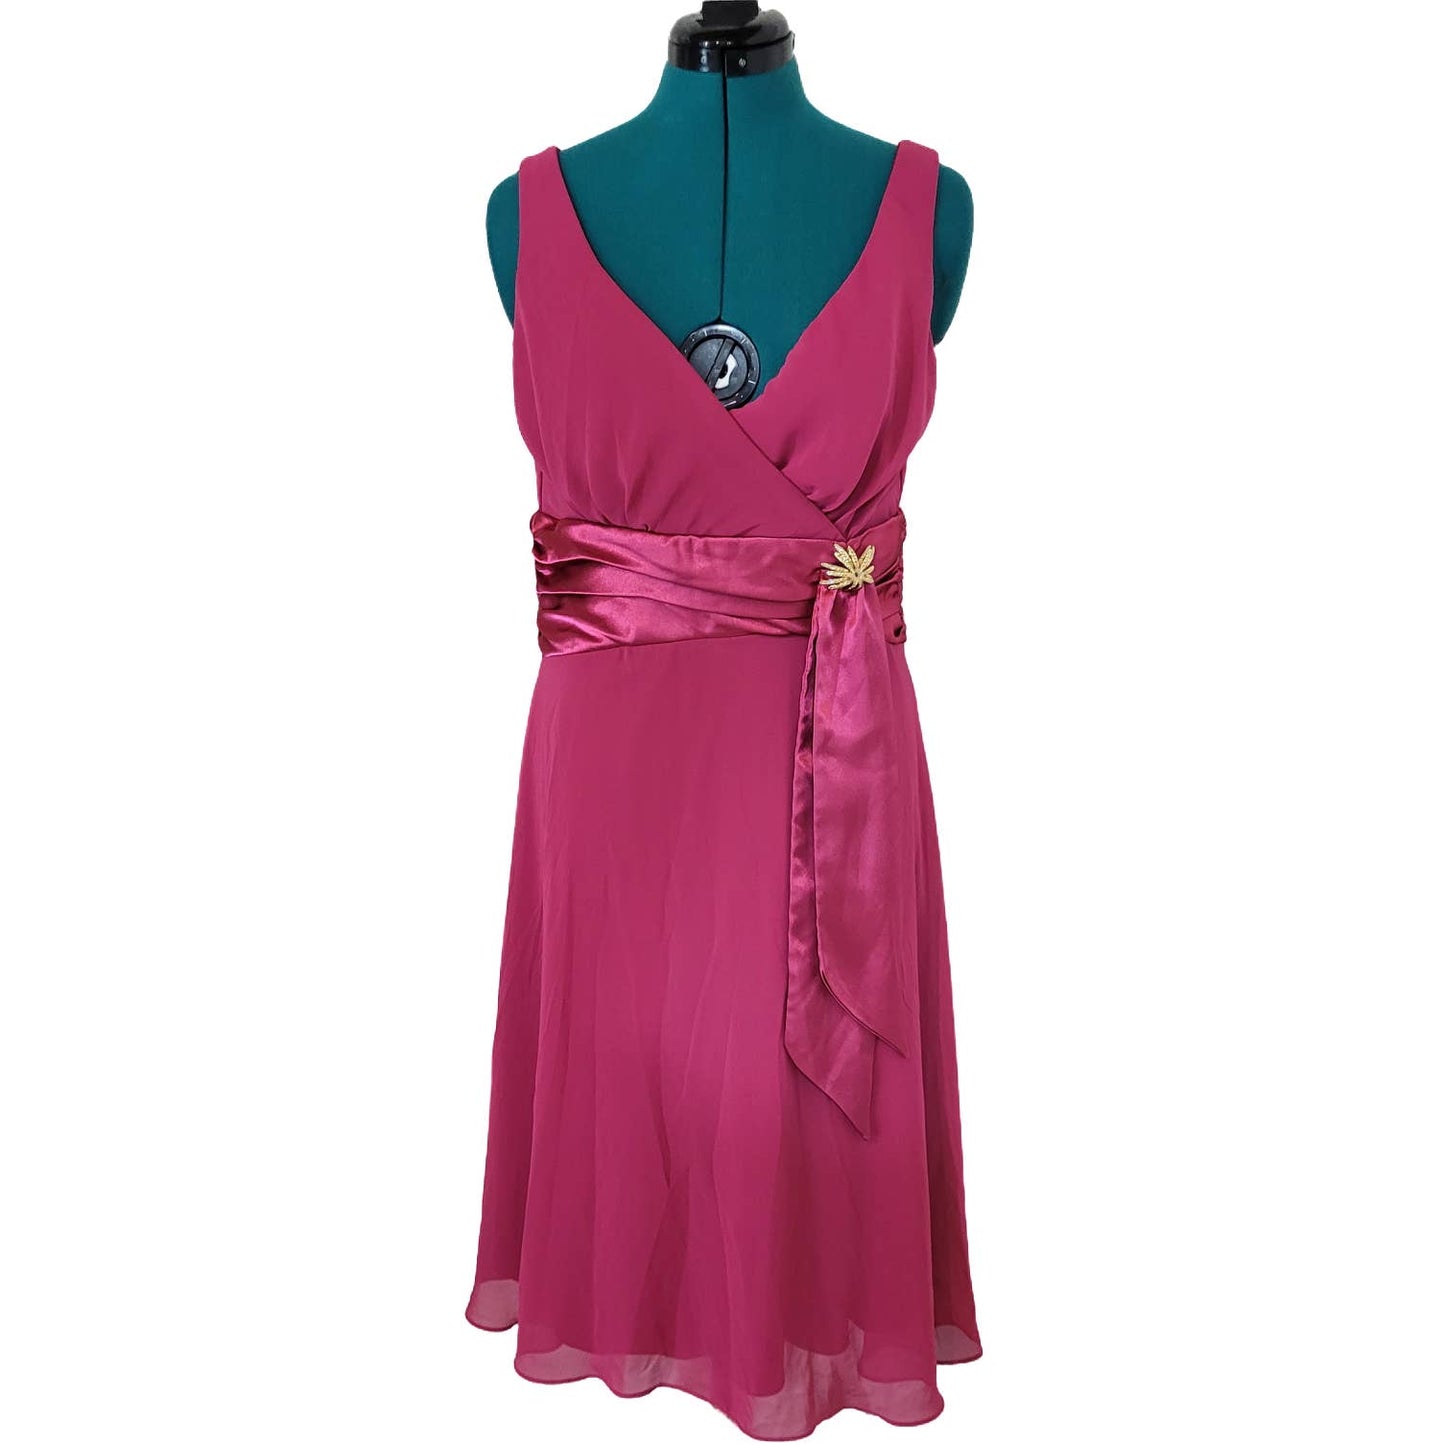 Oblique Pink Chiffon Dress with Satin Waist Tie and Gold Tone Brooch - Size 12